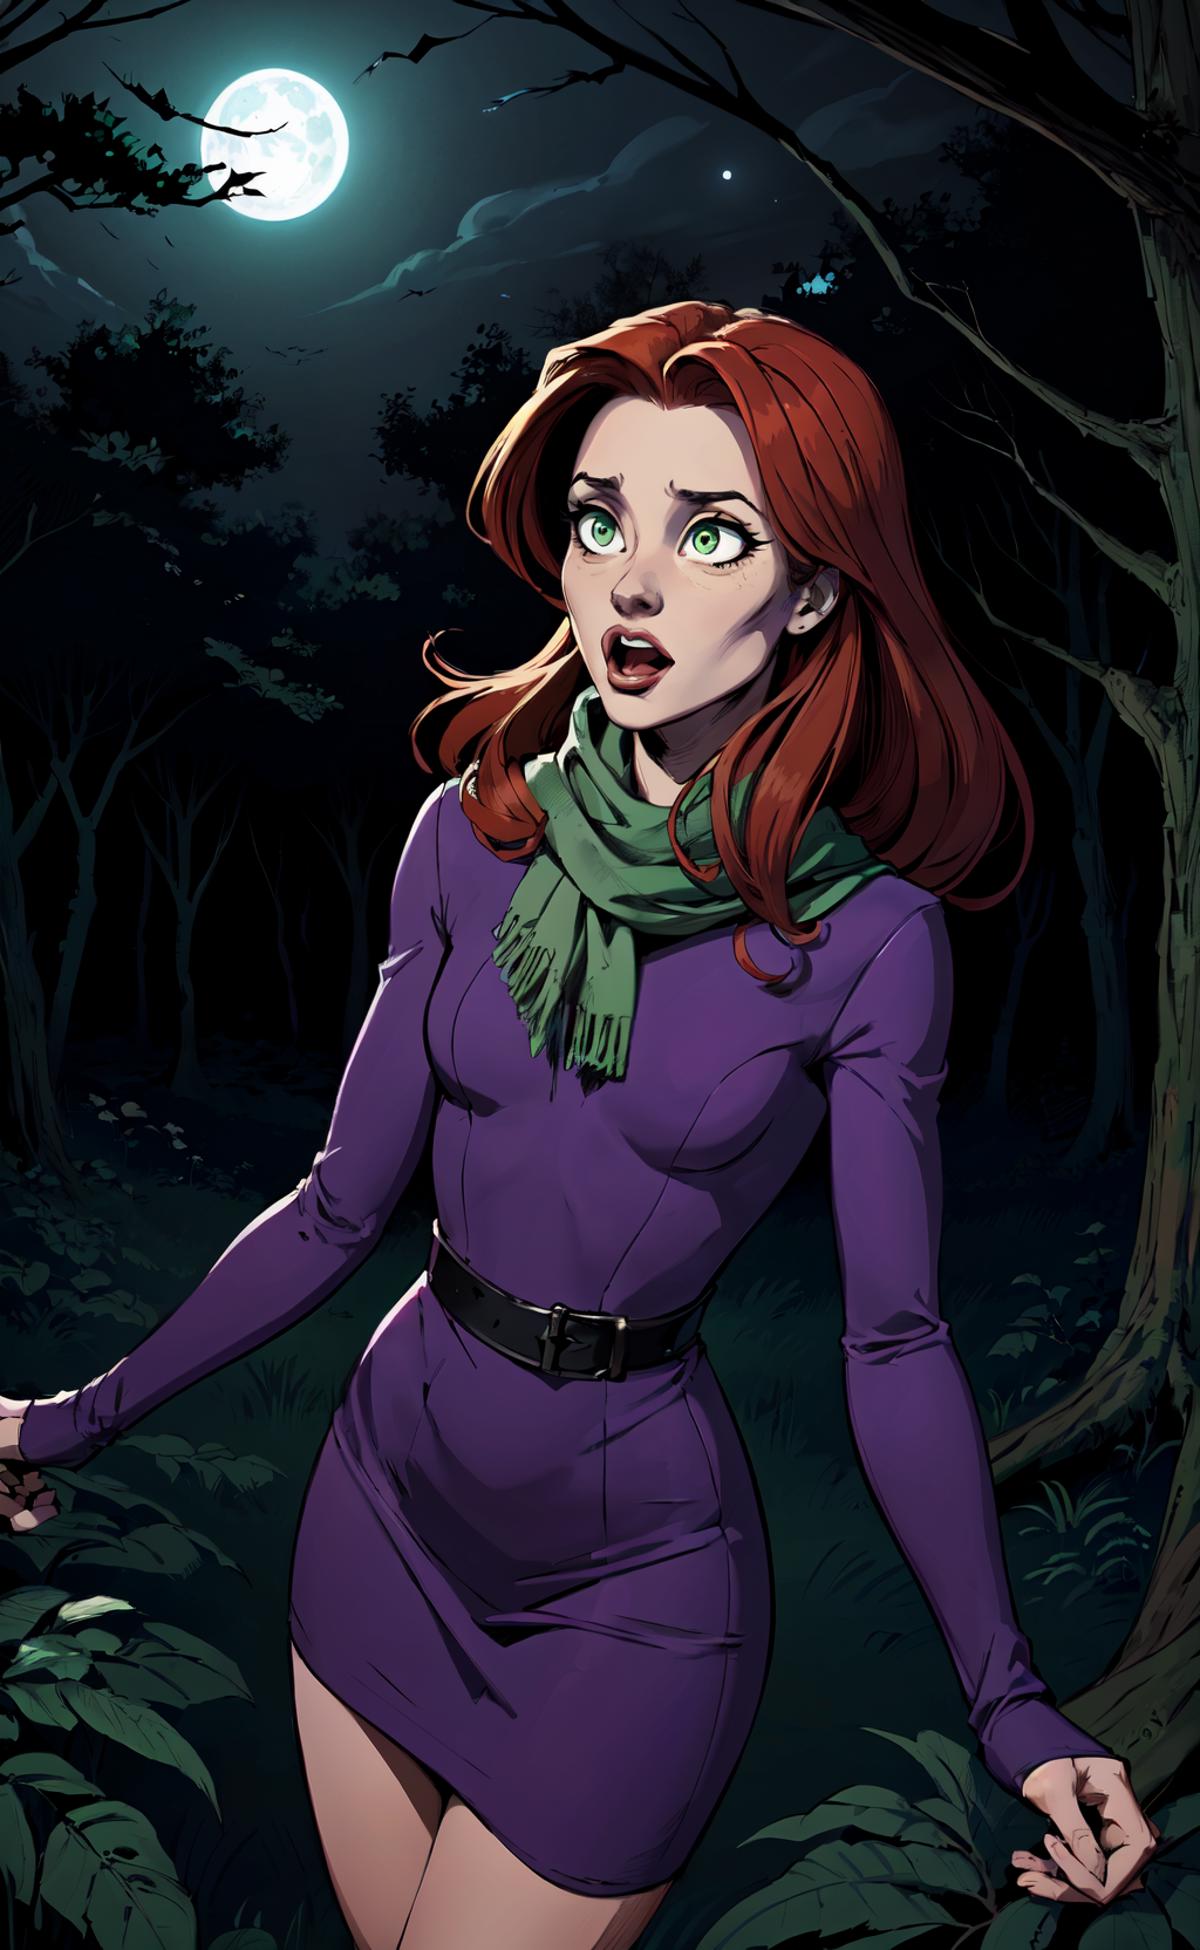 A female character in a purple dress and green scarf standing in a forest.